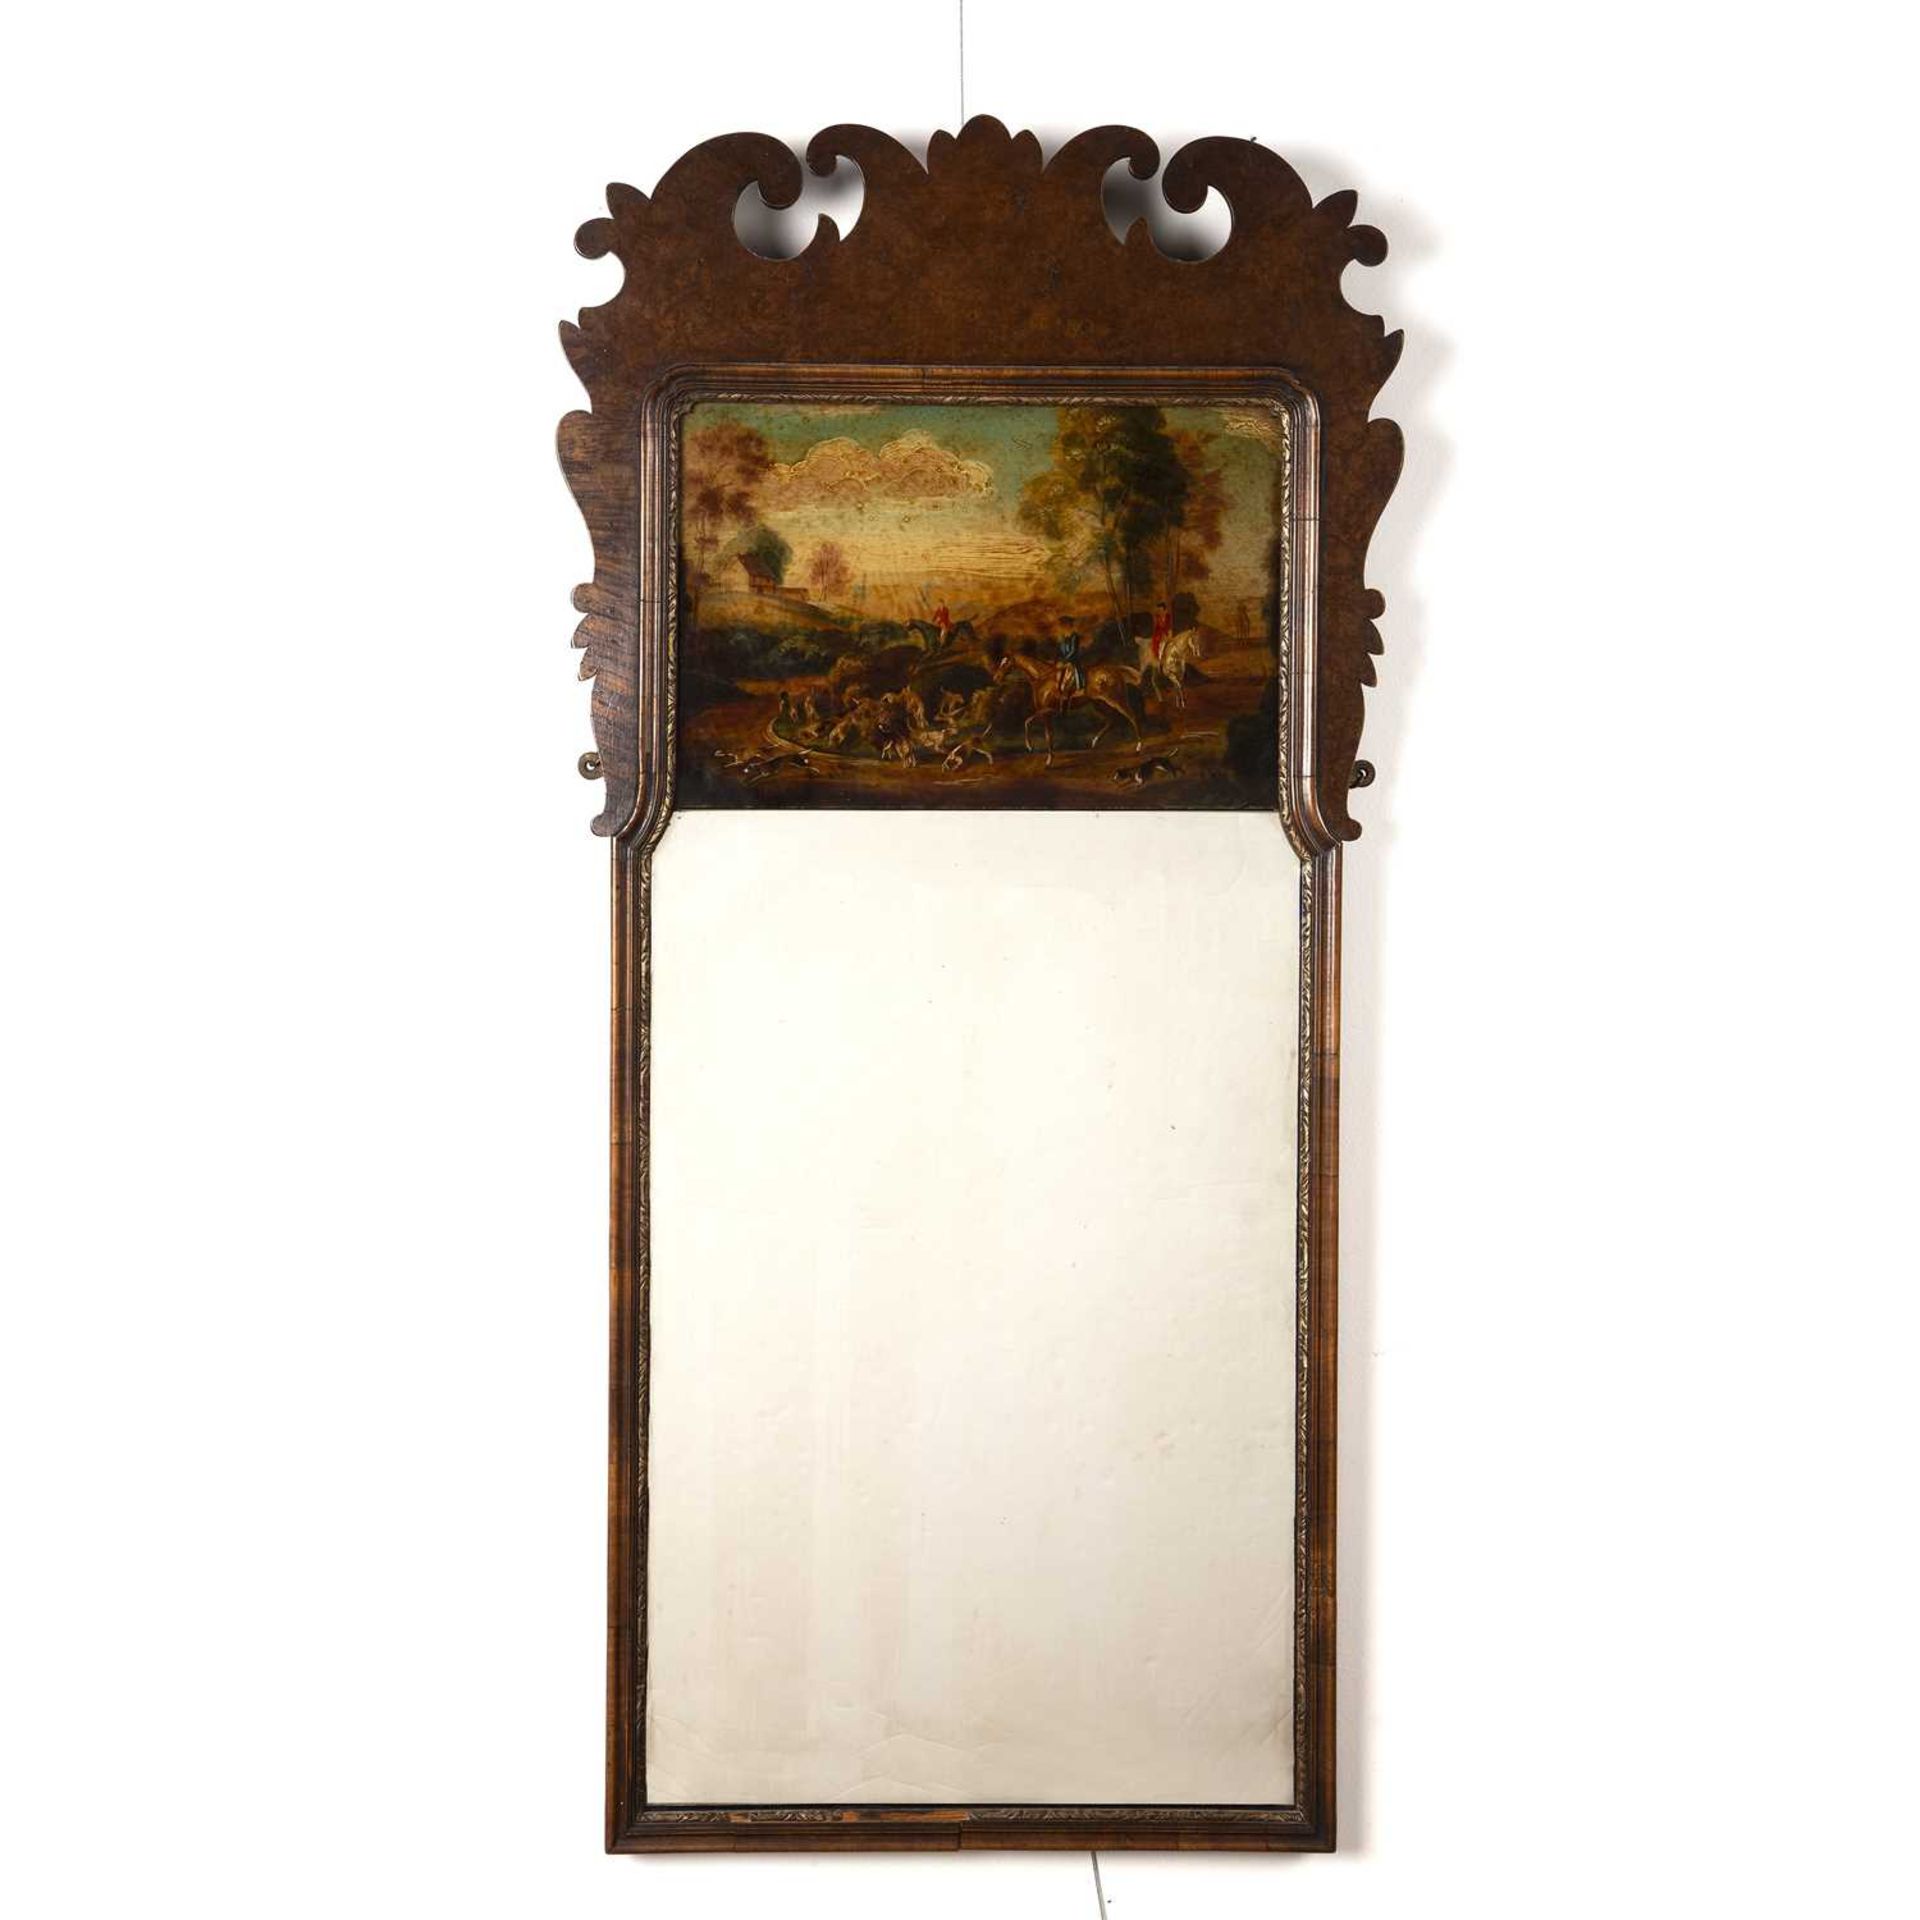 Walnut fret wall mirror 18th Century style, inset with a painted hunting scene, 99.5cm x 48cmSmall